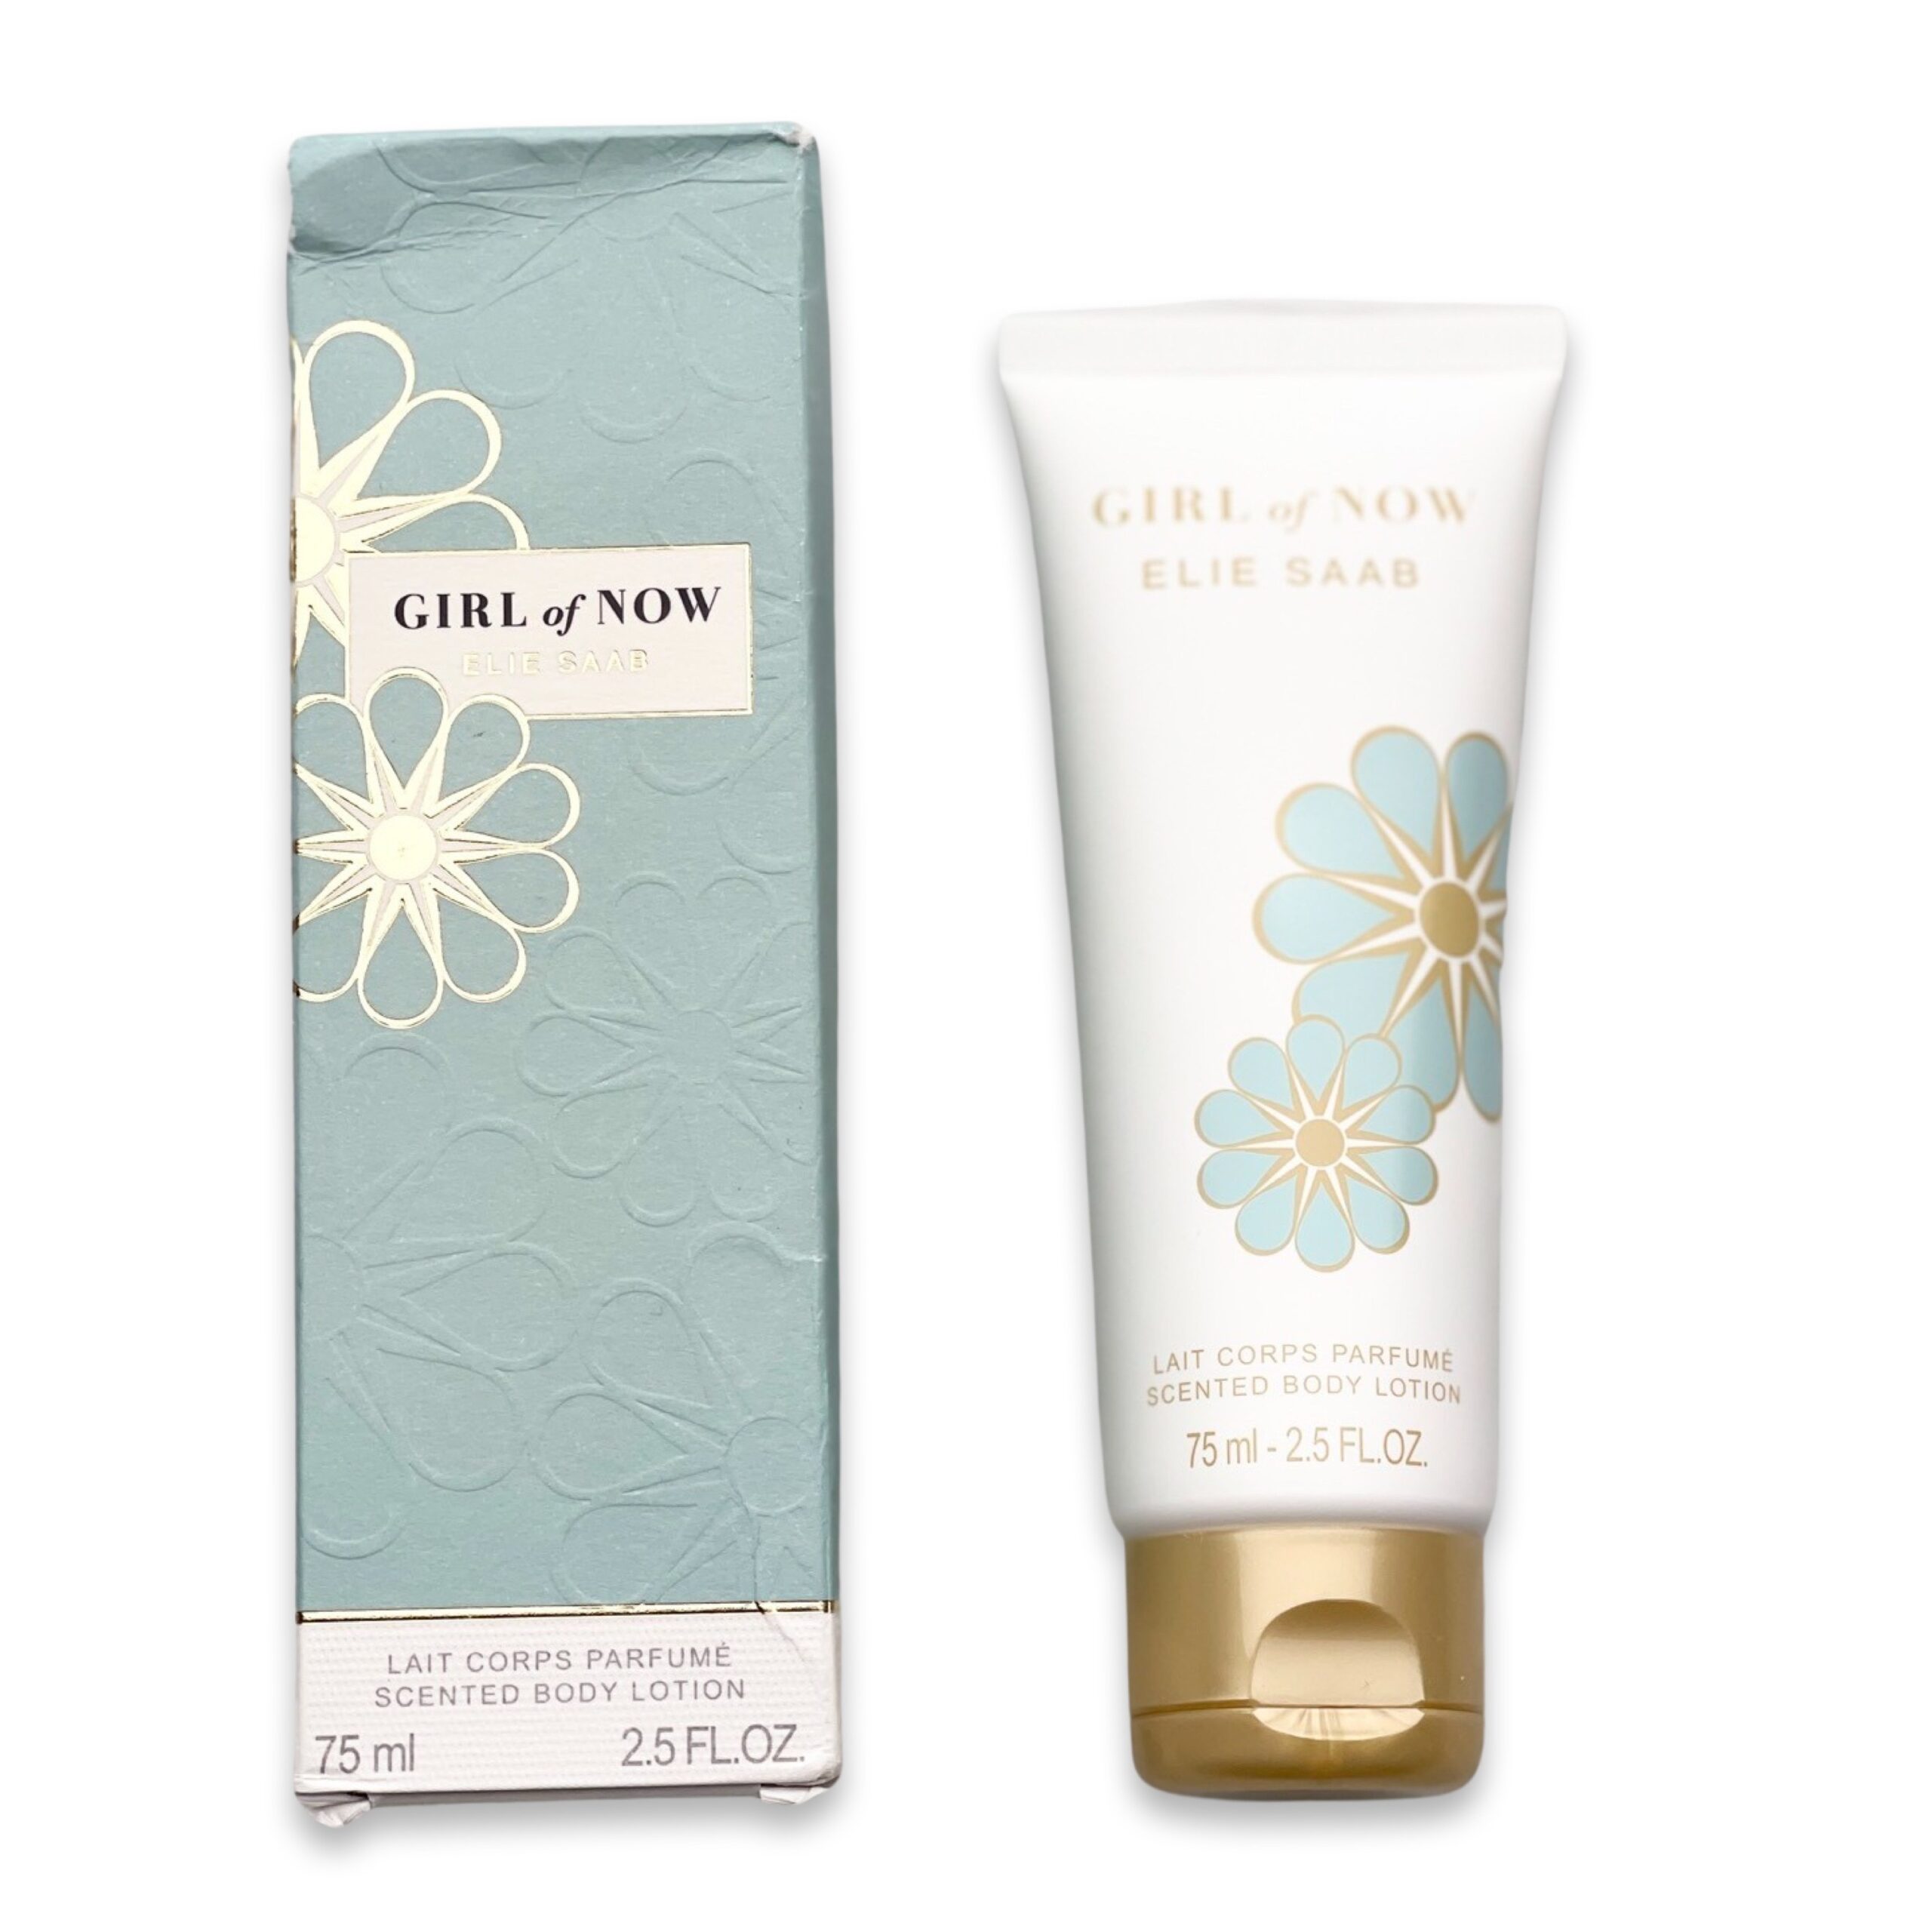 Elie Saab Girl of NOW Lait Corps Parfume Scented Body Lotion / Travel Size (75ml)